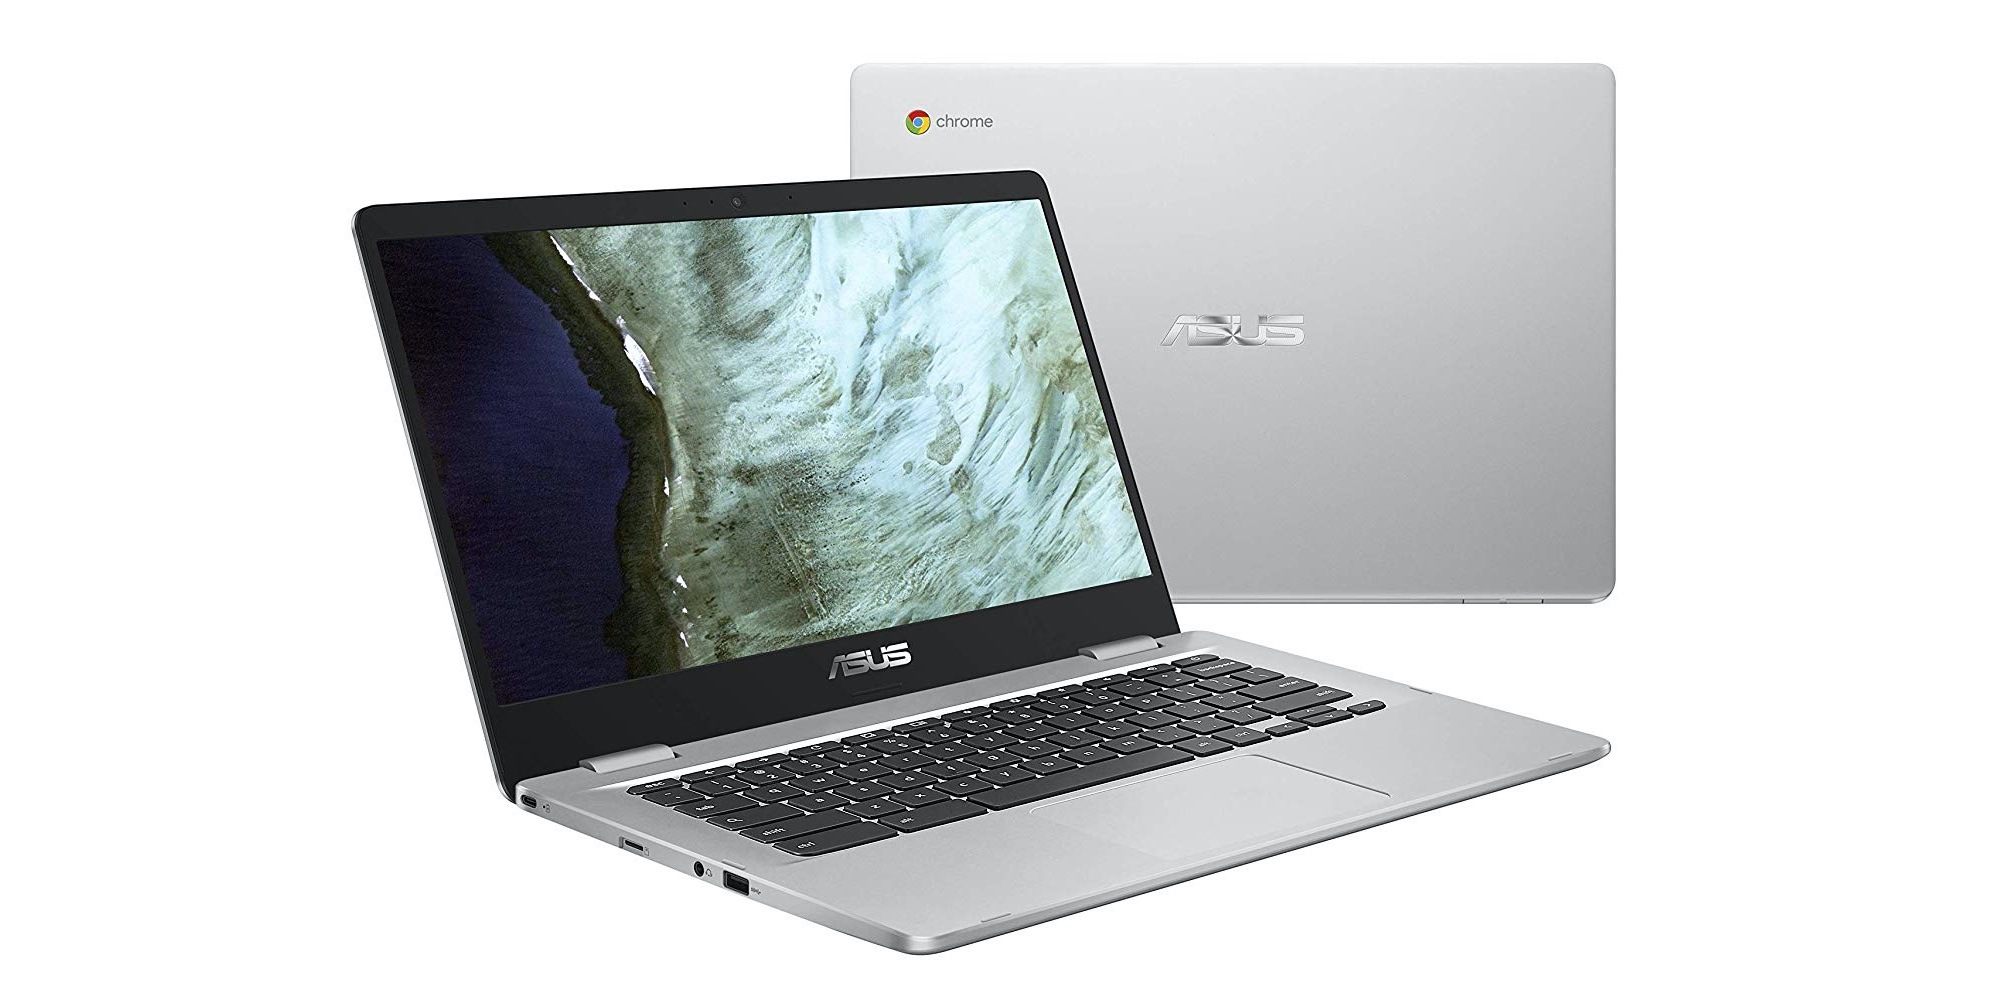 Enjoy Usb C Connectivity On The Asus Chromebook 14 At 179